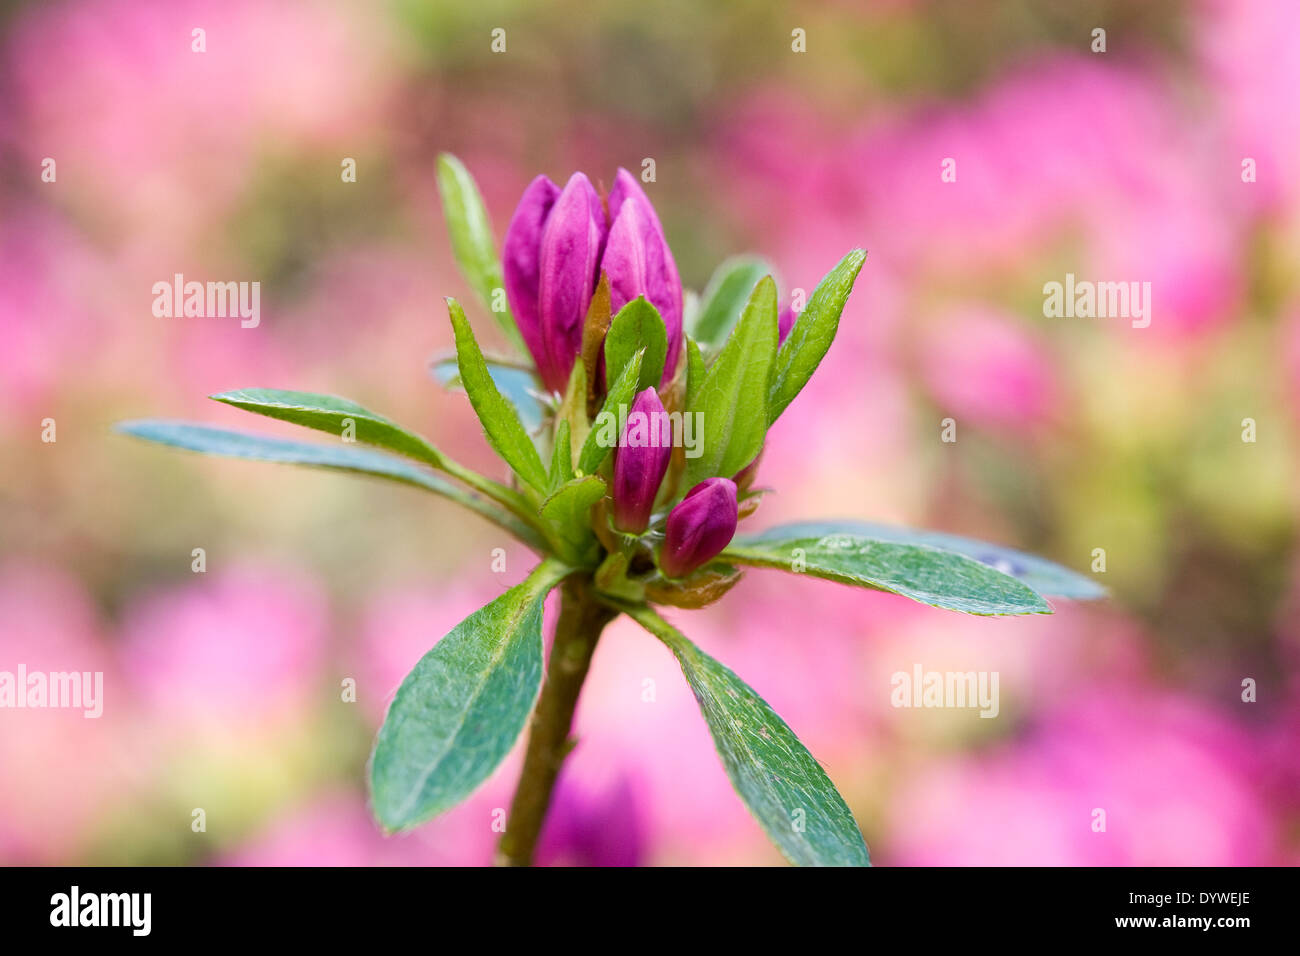 Pink Rhodoendron buds in early Spring. Stock Photo